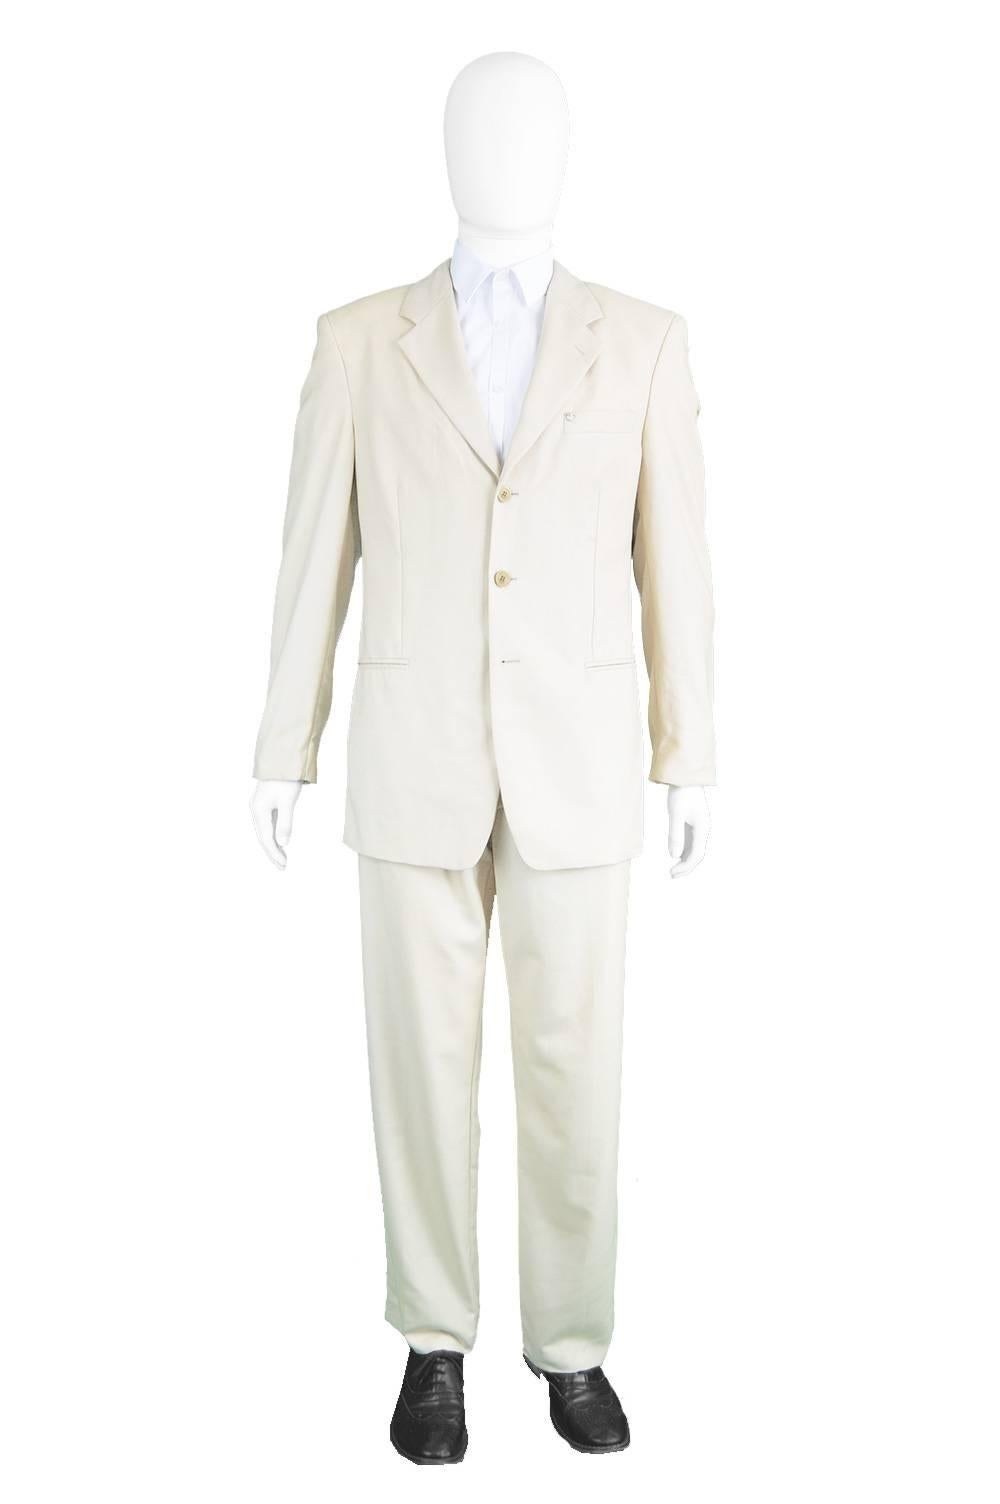 An absolutely incredible men's vintage two piece suit from the early 1990s by legendary Italian designer, Gianni Versace for his couture line. In a cream fabric with a subtle medusa head jacquard weave throughout, not noticeable until someone gets